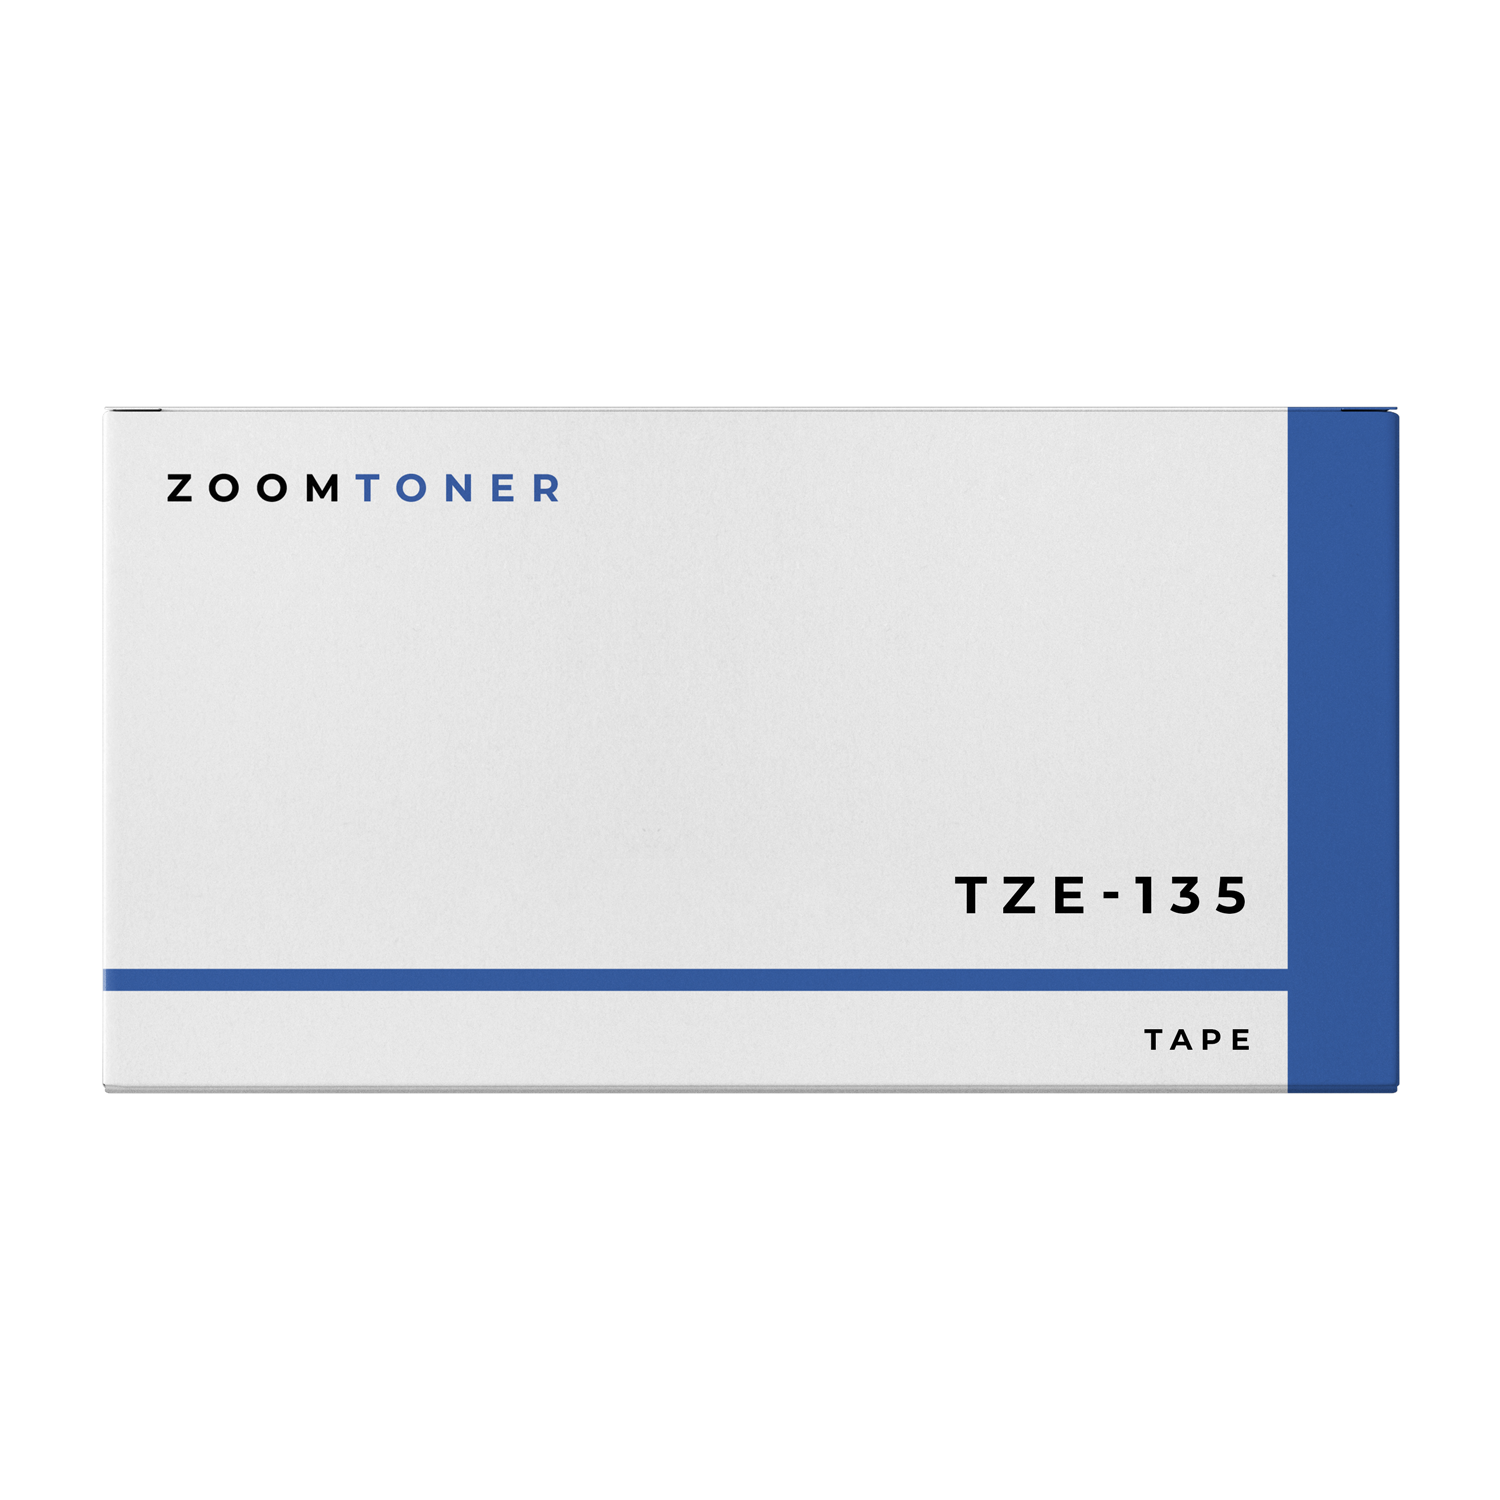 Brand New Original Brother TZE-135 - White on Clear Laminated Tape for P-touch Label Makers - 12 mm wide x 8 m long